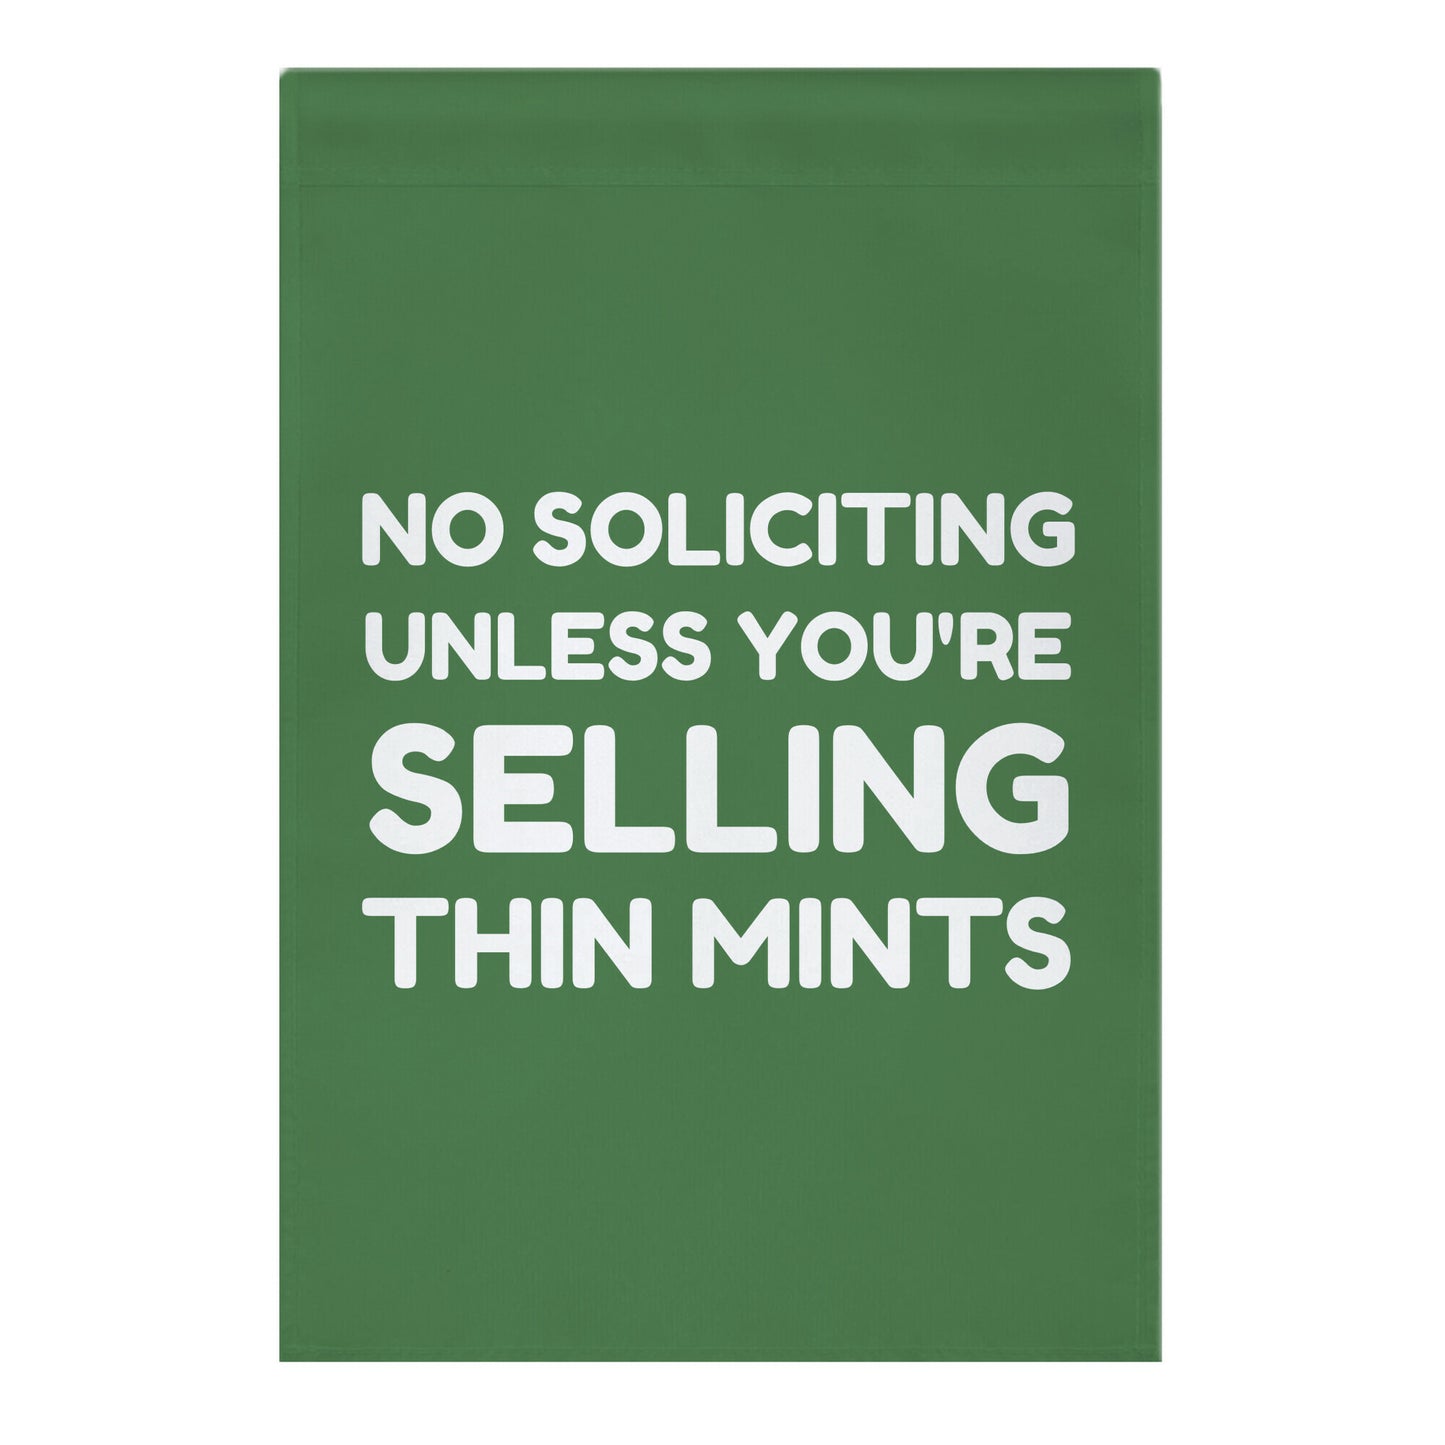 No Soliciting Unless You're Selling Thin Mints Garden Flag